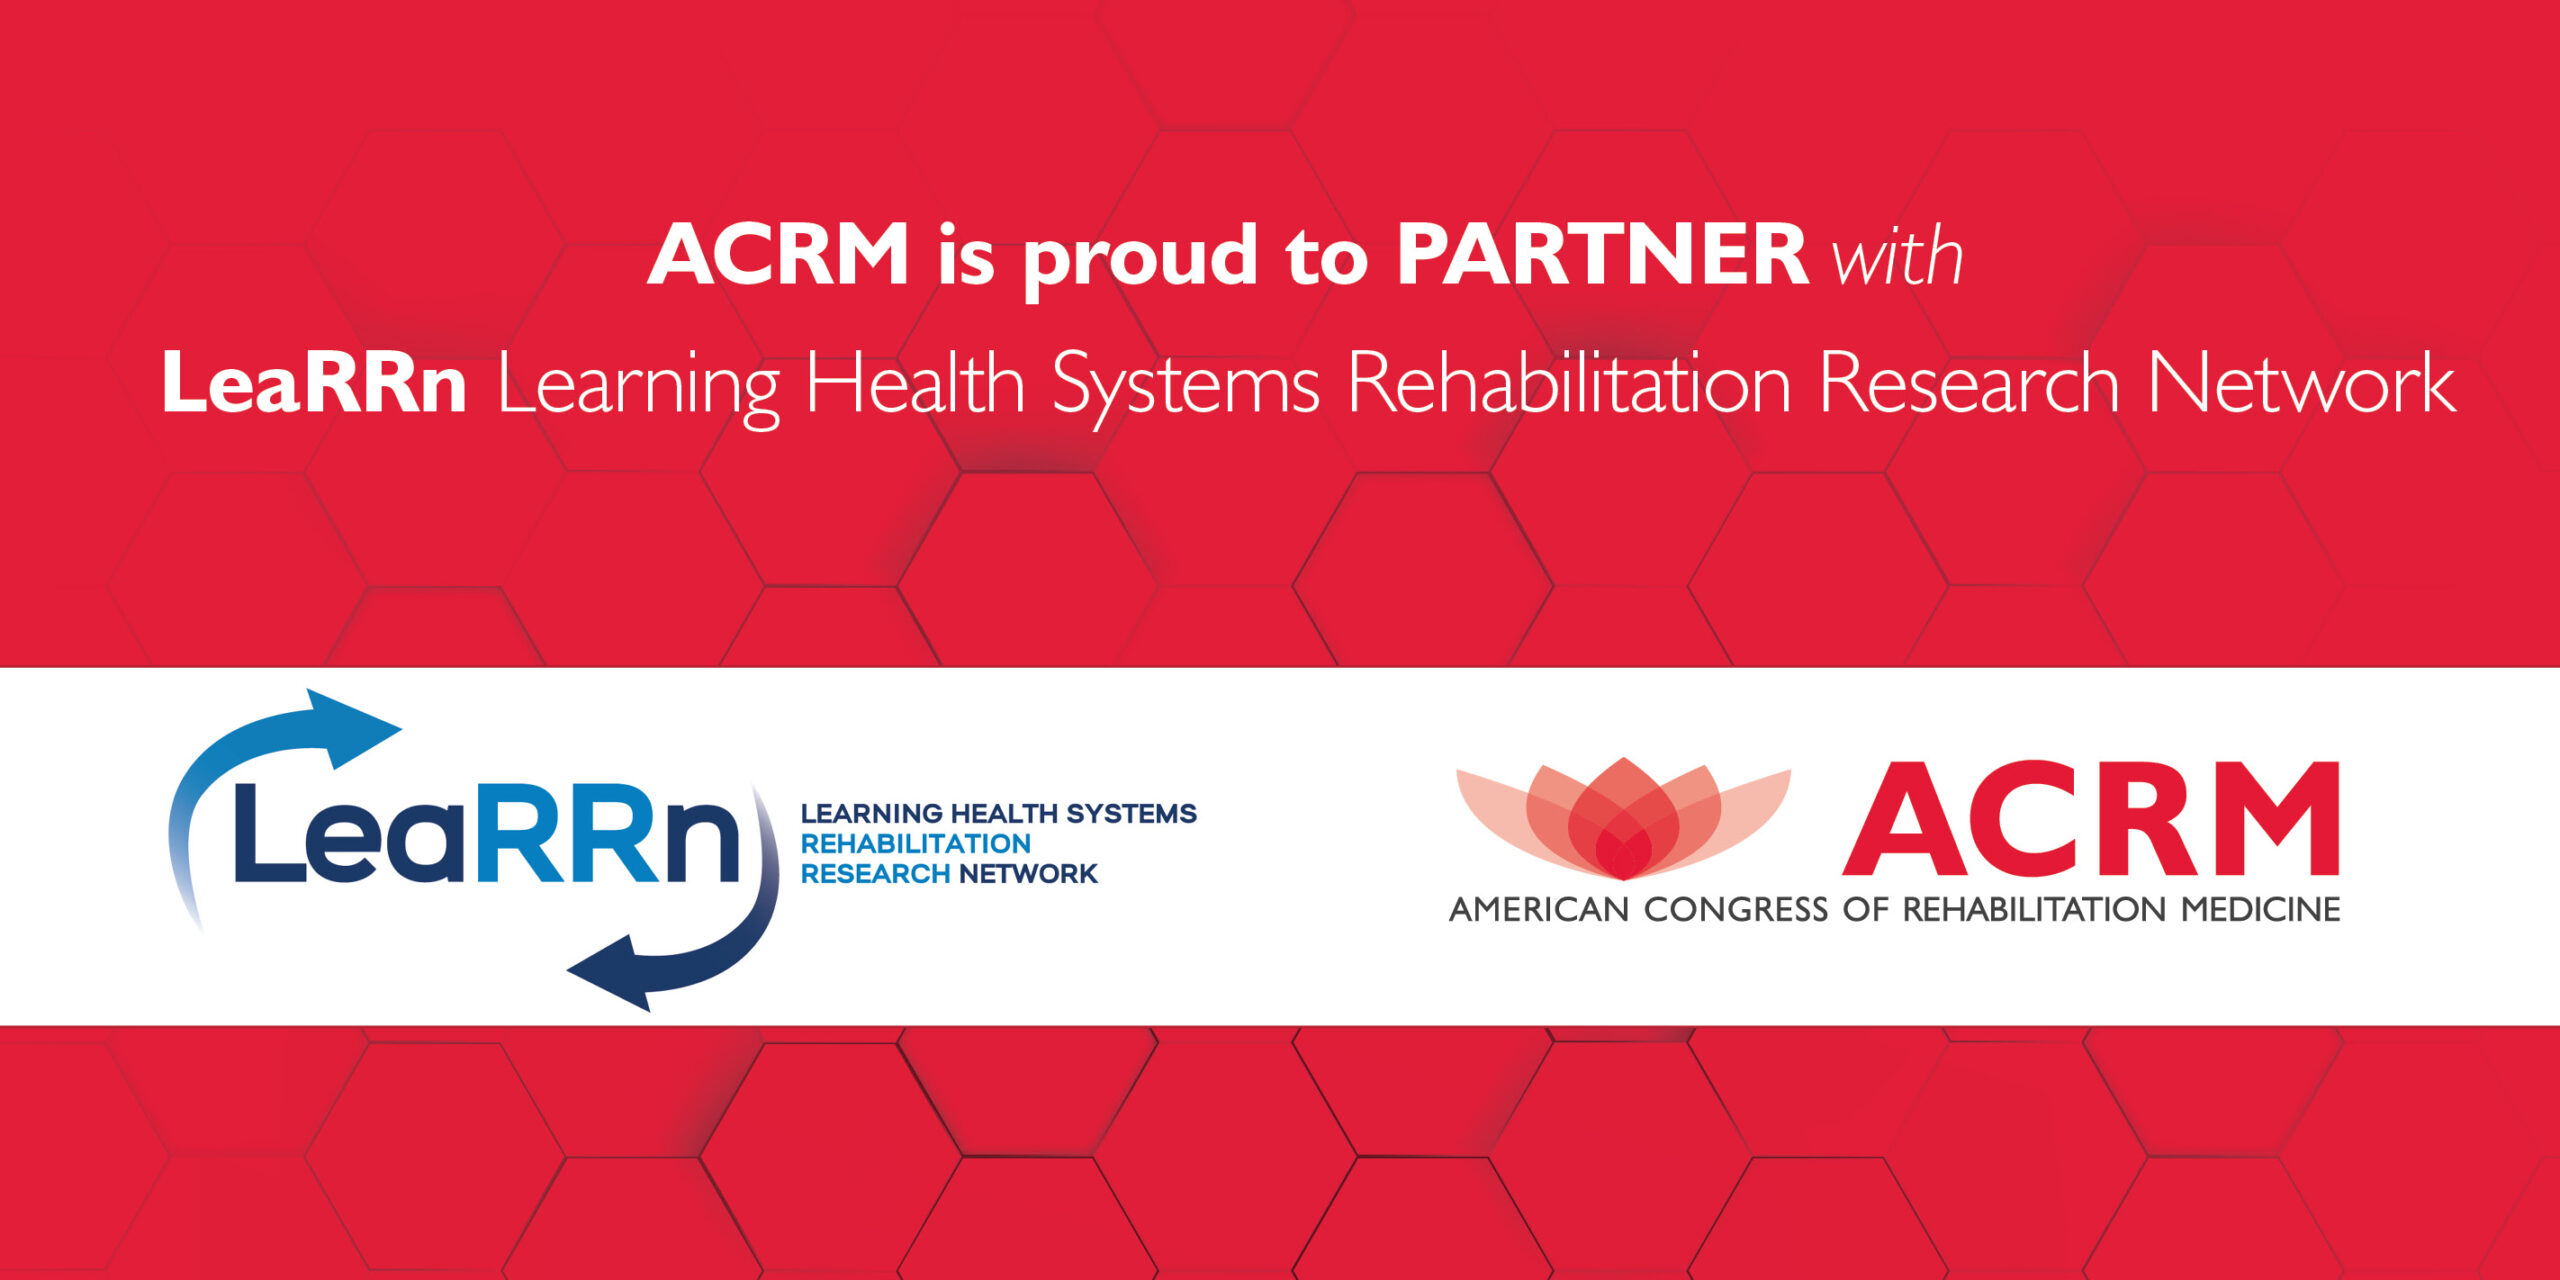 ACRM is proud to partner with LeaRRn image